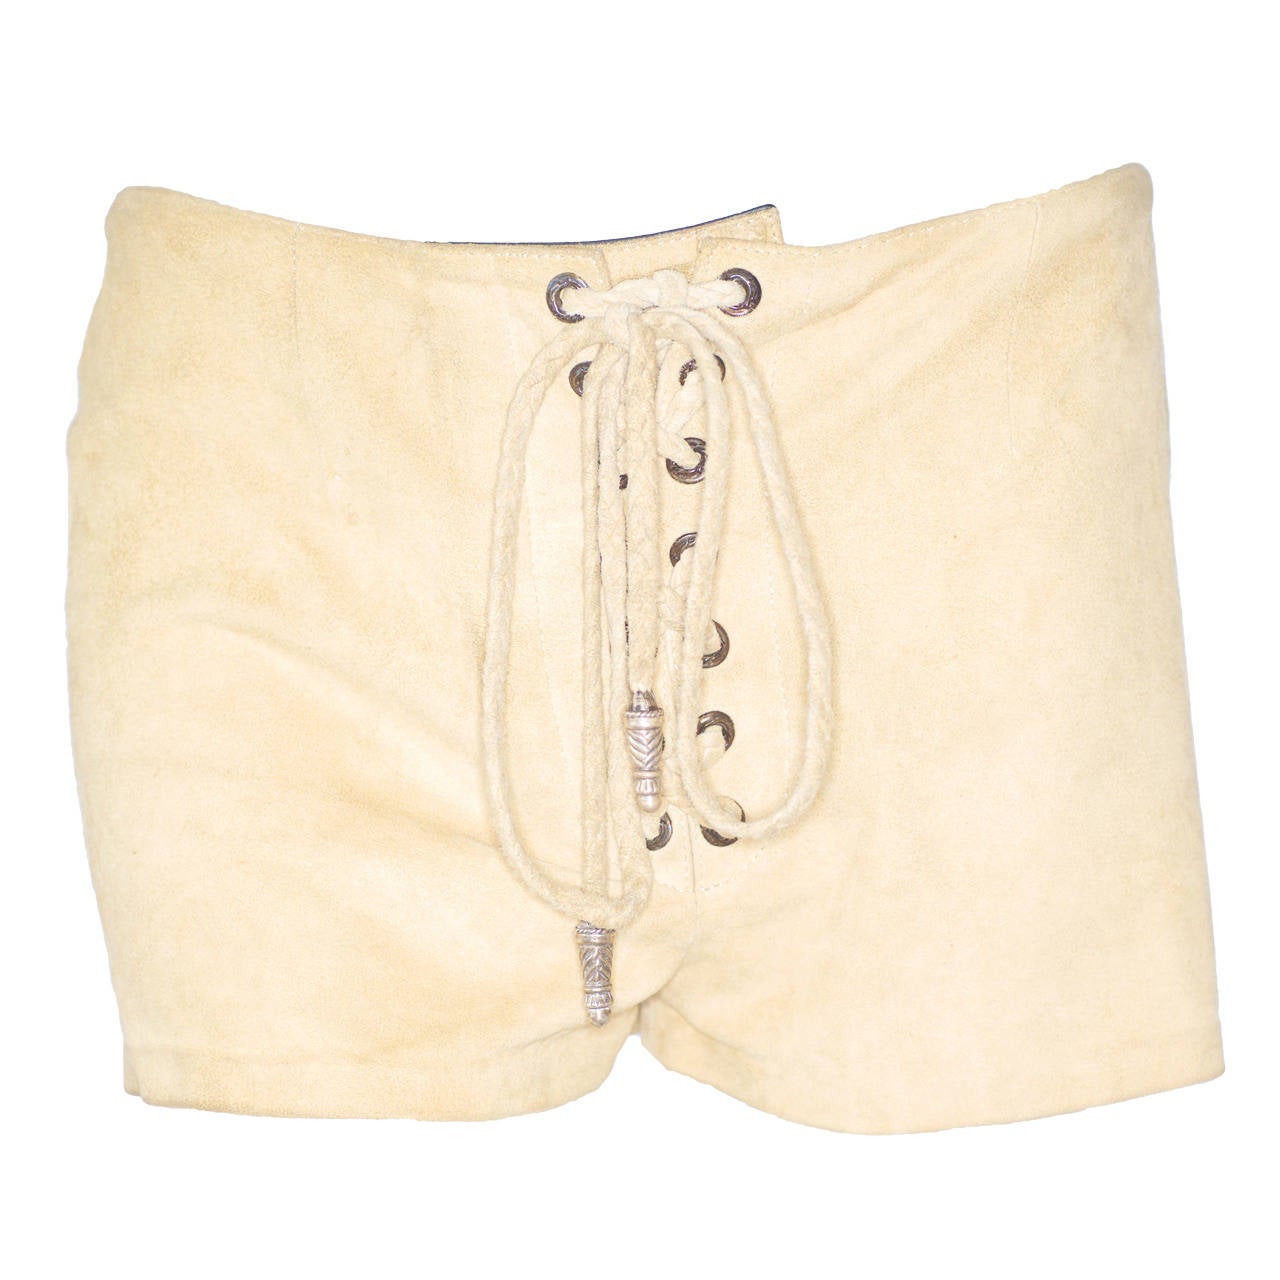 Chrome Hearts 70s Inspired Suede Shorts with Silver For Sale